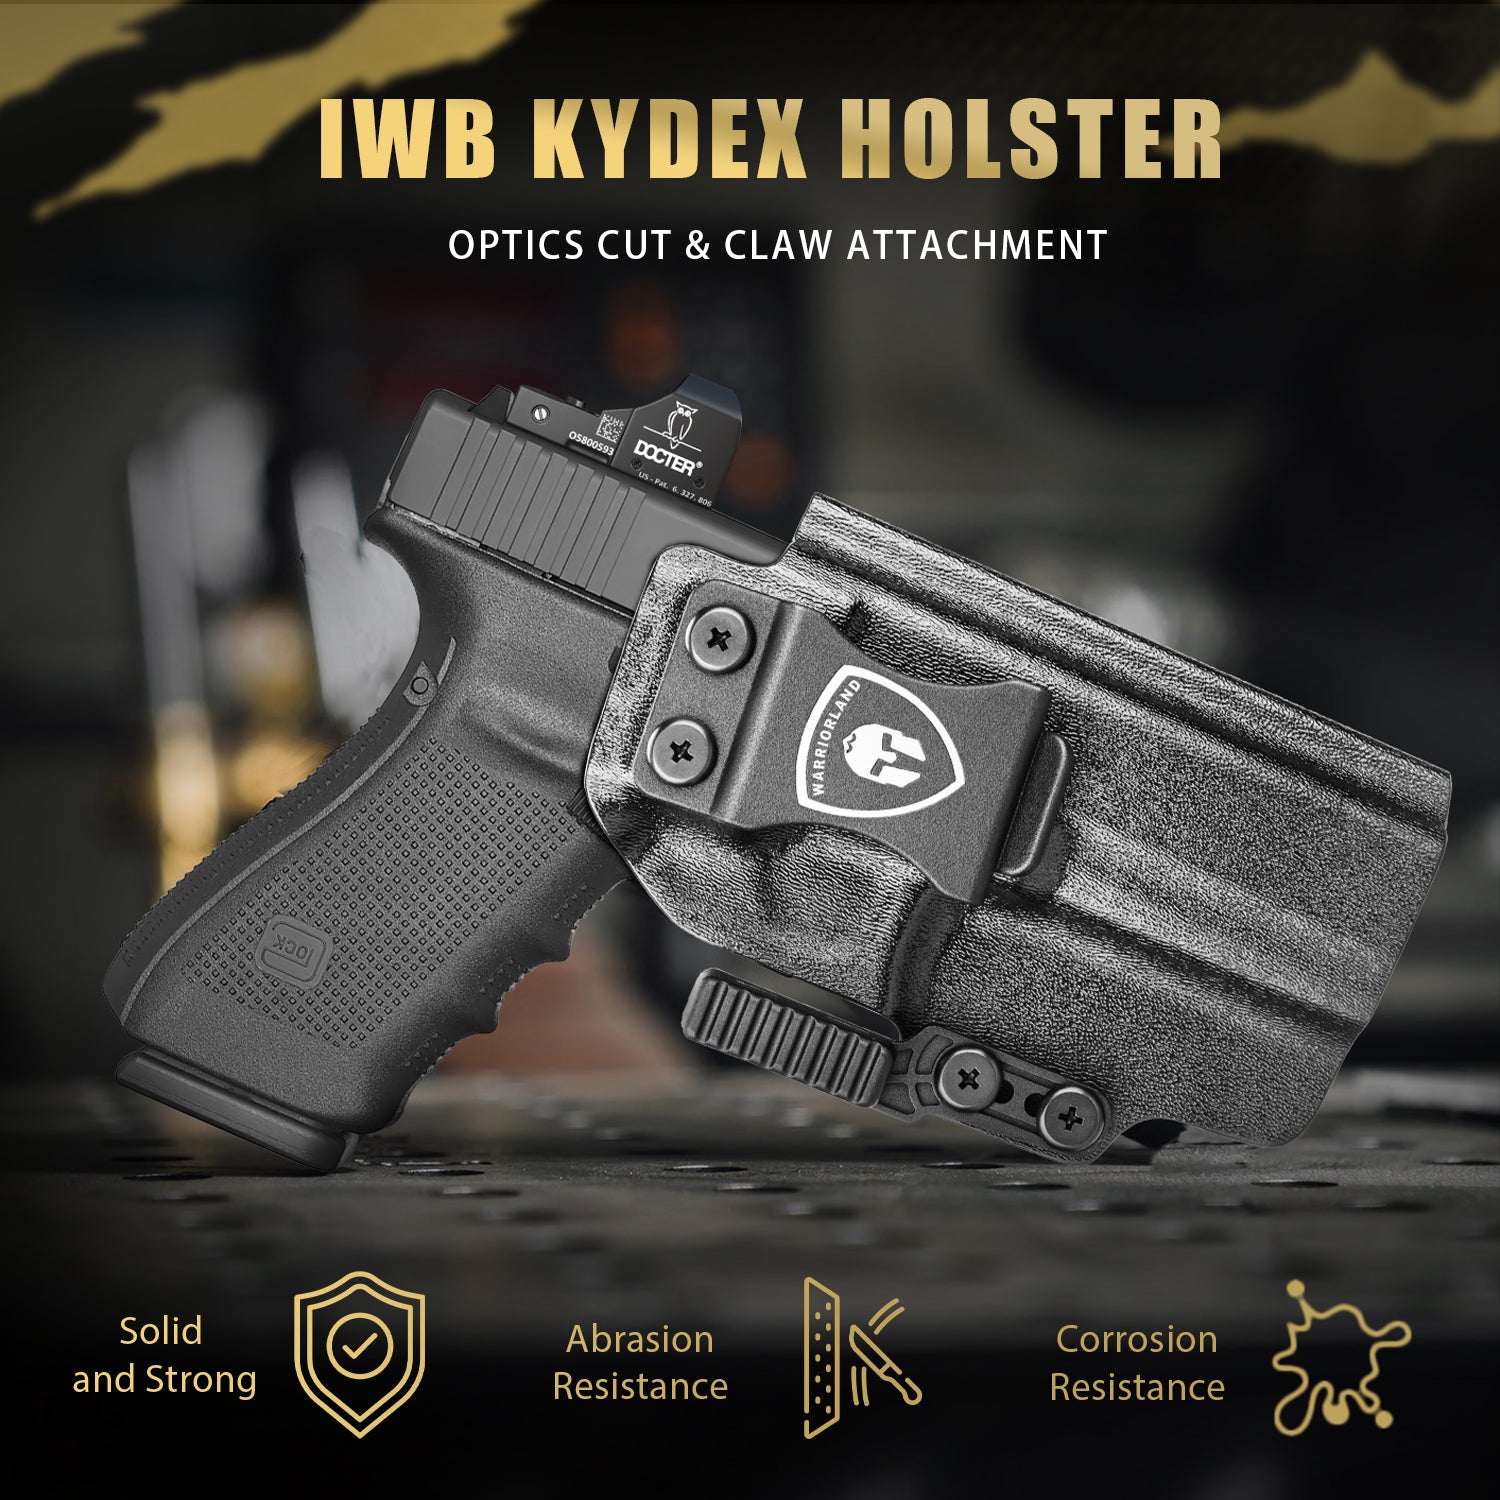 IWB Kydex Holster with Claw Attachment and Optic Cut Fit G20 / G21 (Gen 3 4 5) & G22 Gen 5 Pistol, Inside Waistband Appendix Carry G21 Holster, Adj. Cant & Retention, Right Hand|WARRIORLAND